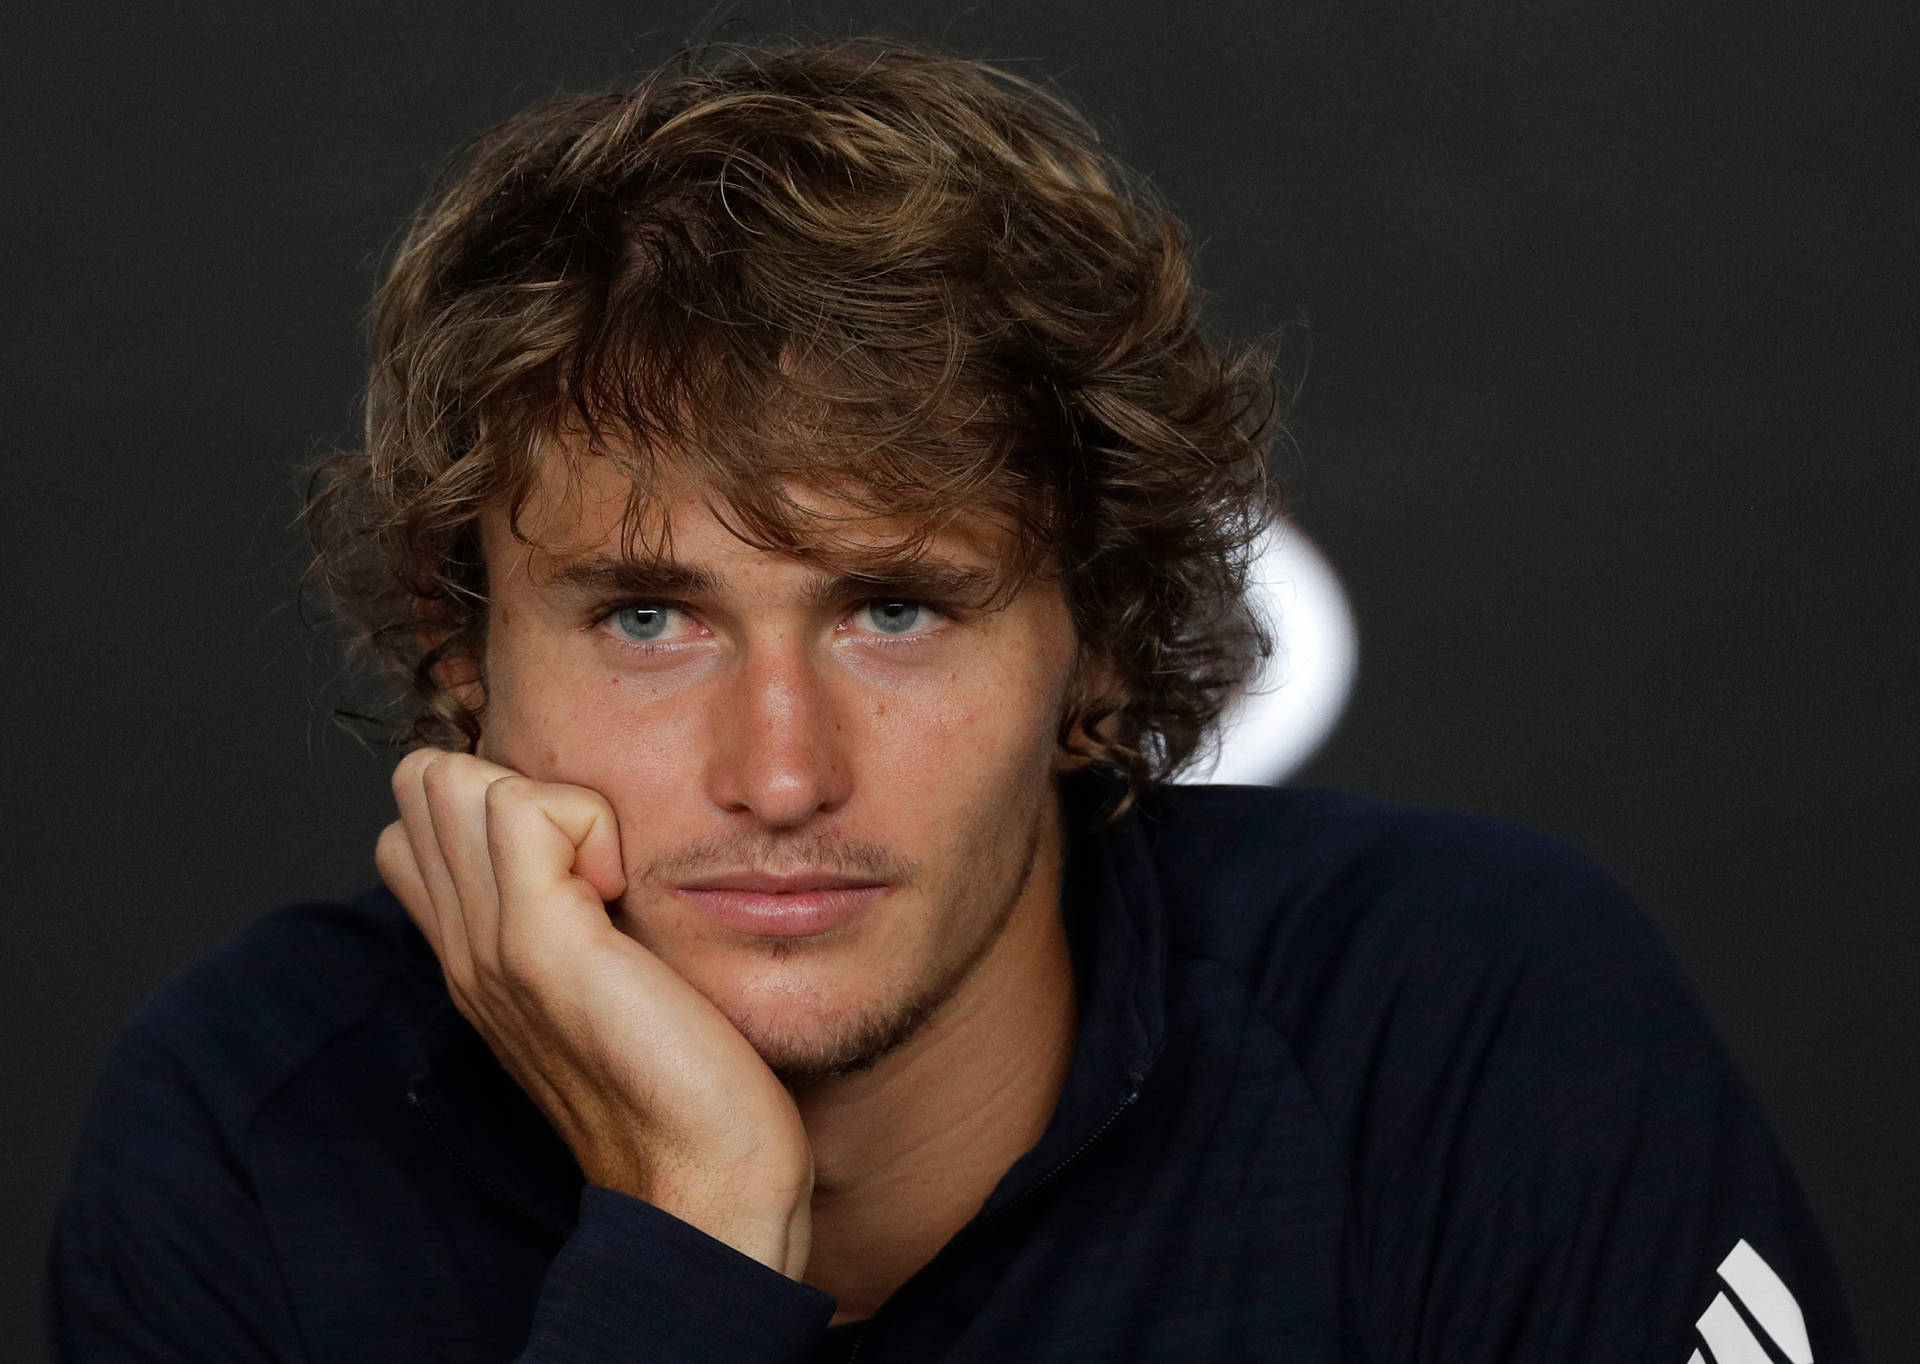 Post-game Interview Session With Alexander Zverev